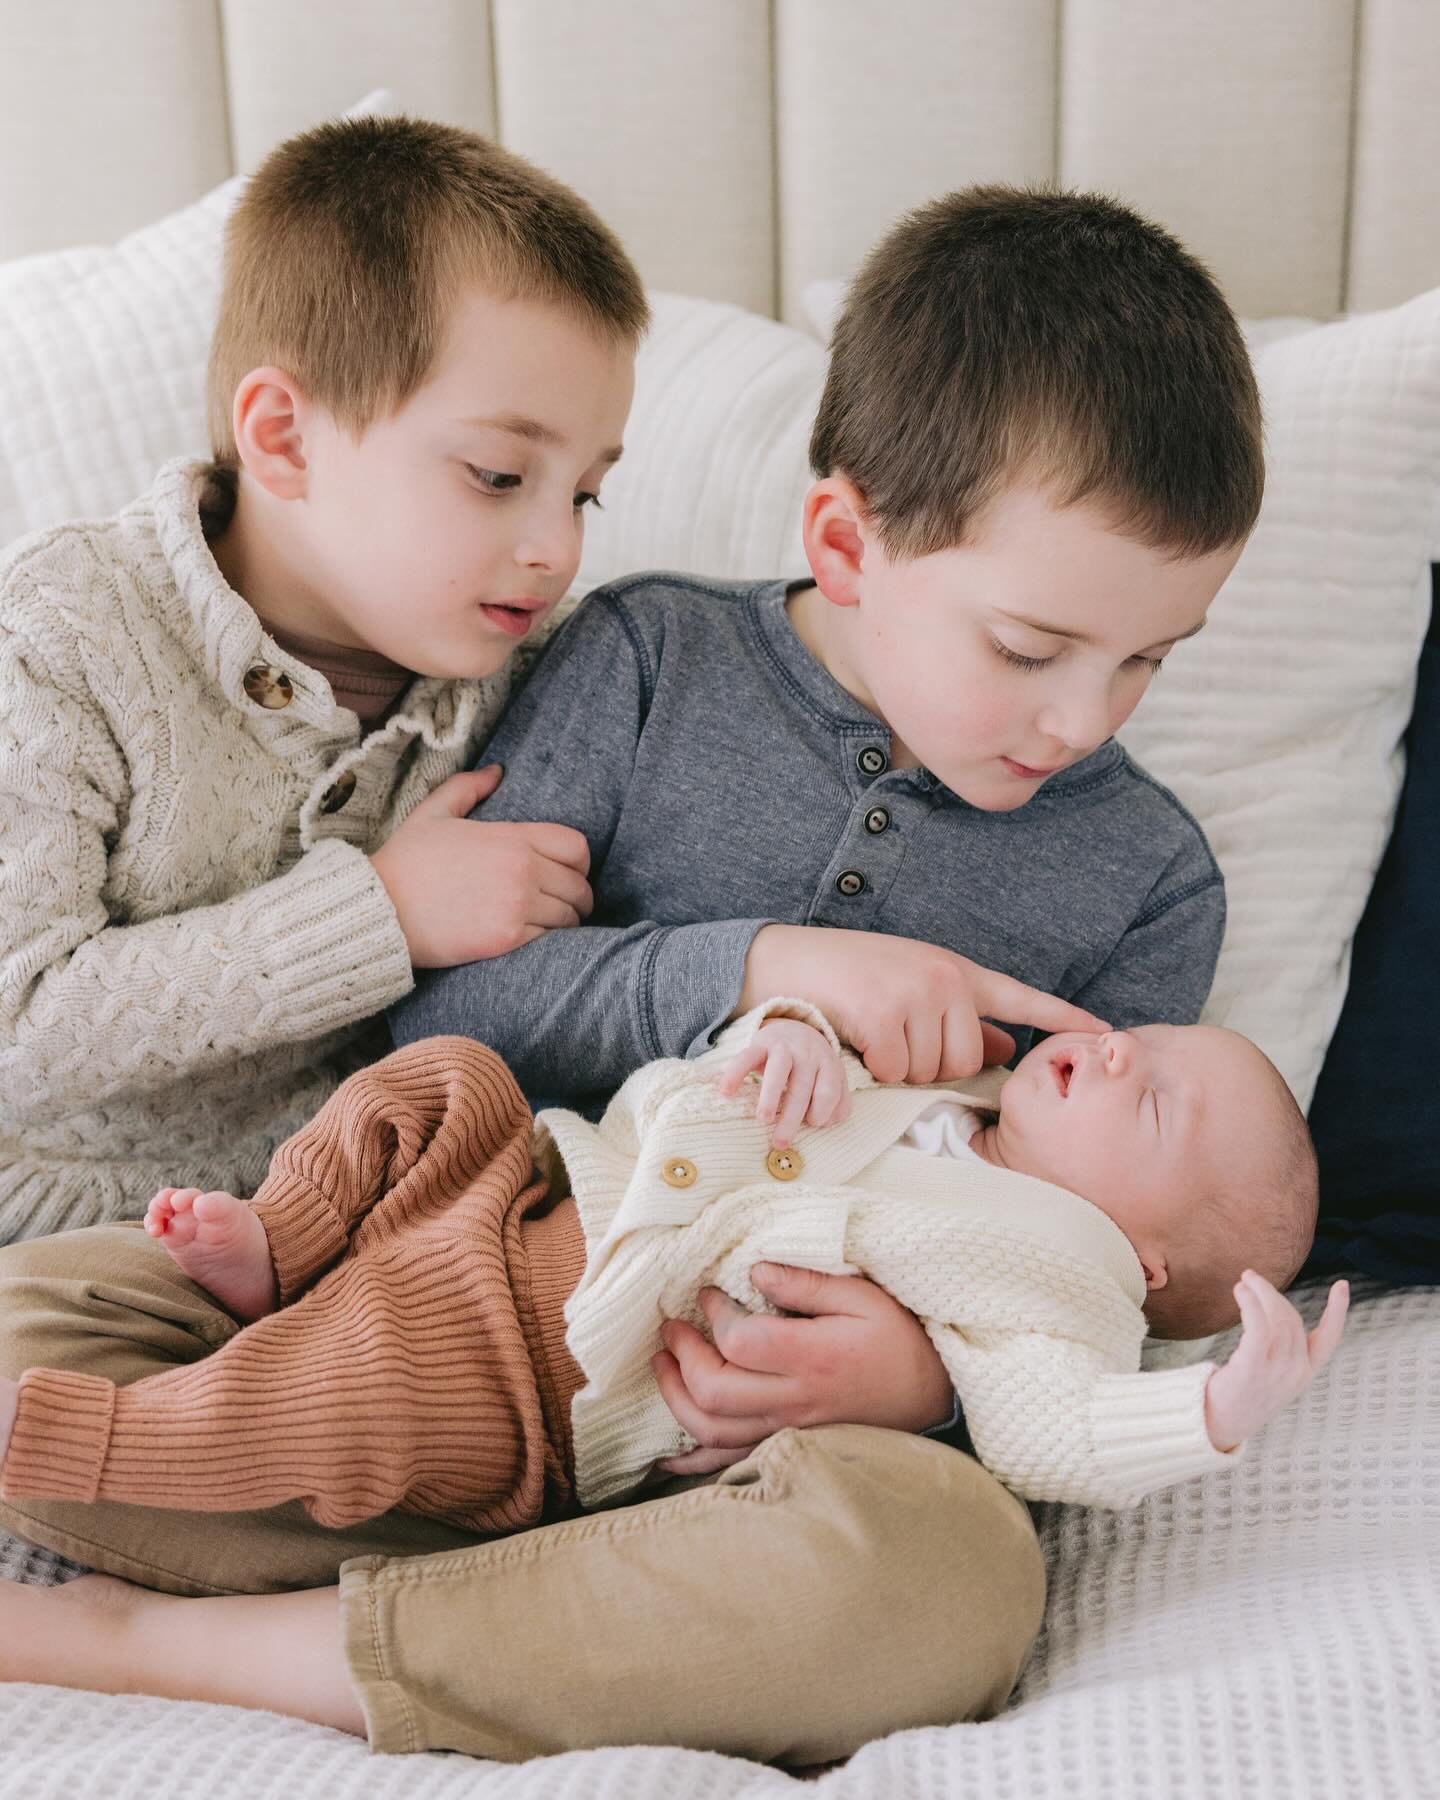 Luke and Cole have stepped into their big brother roles like champs, showing little Janie all the love she could ever hope for. They will teach her to be like them&mdash;kind, generous, thoughtful, sweet, and a little silly!!

#familyphotography #del